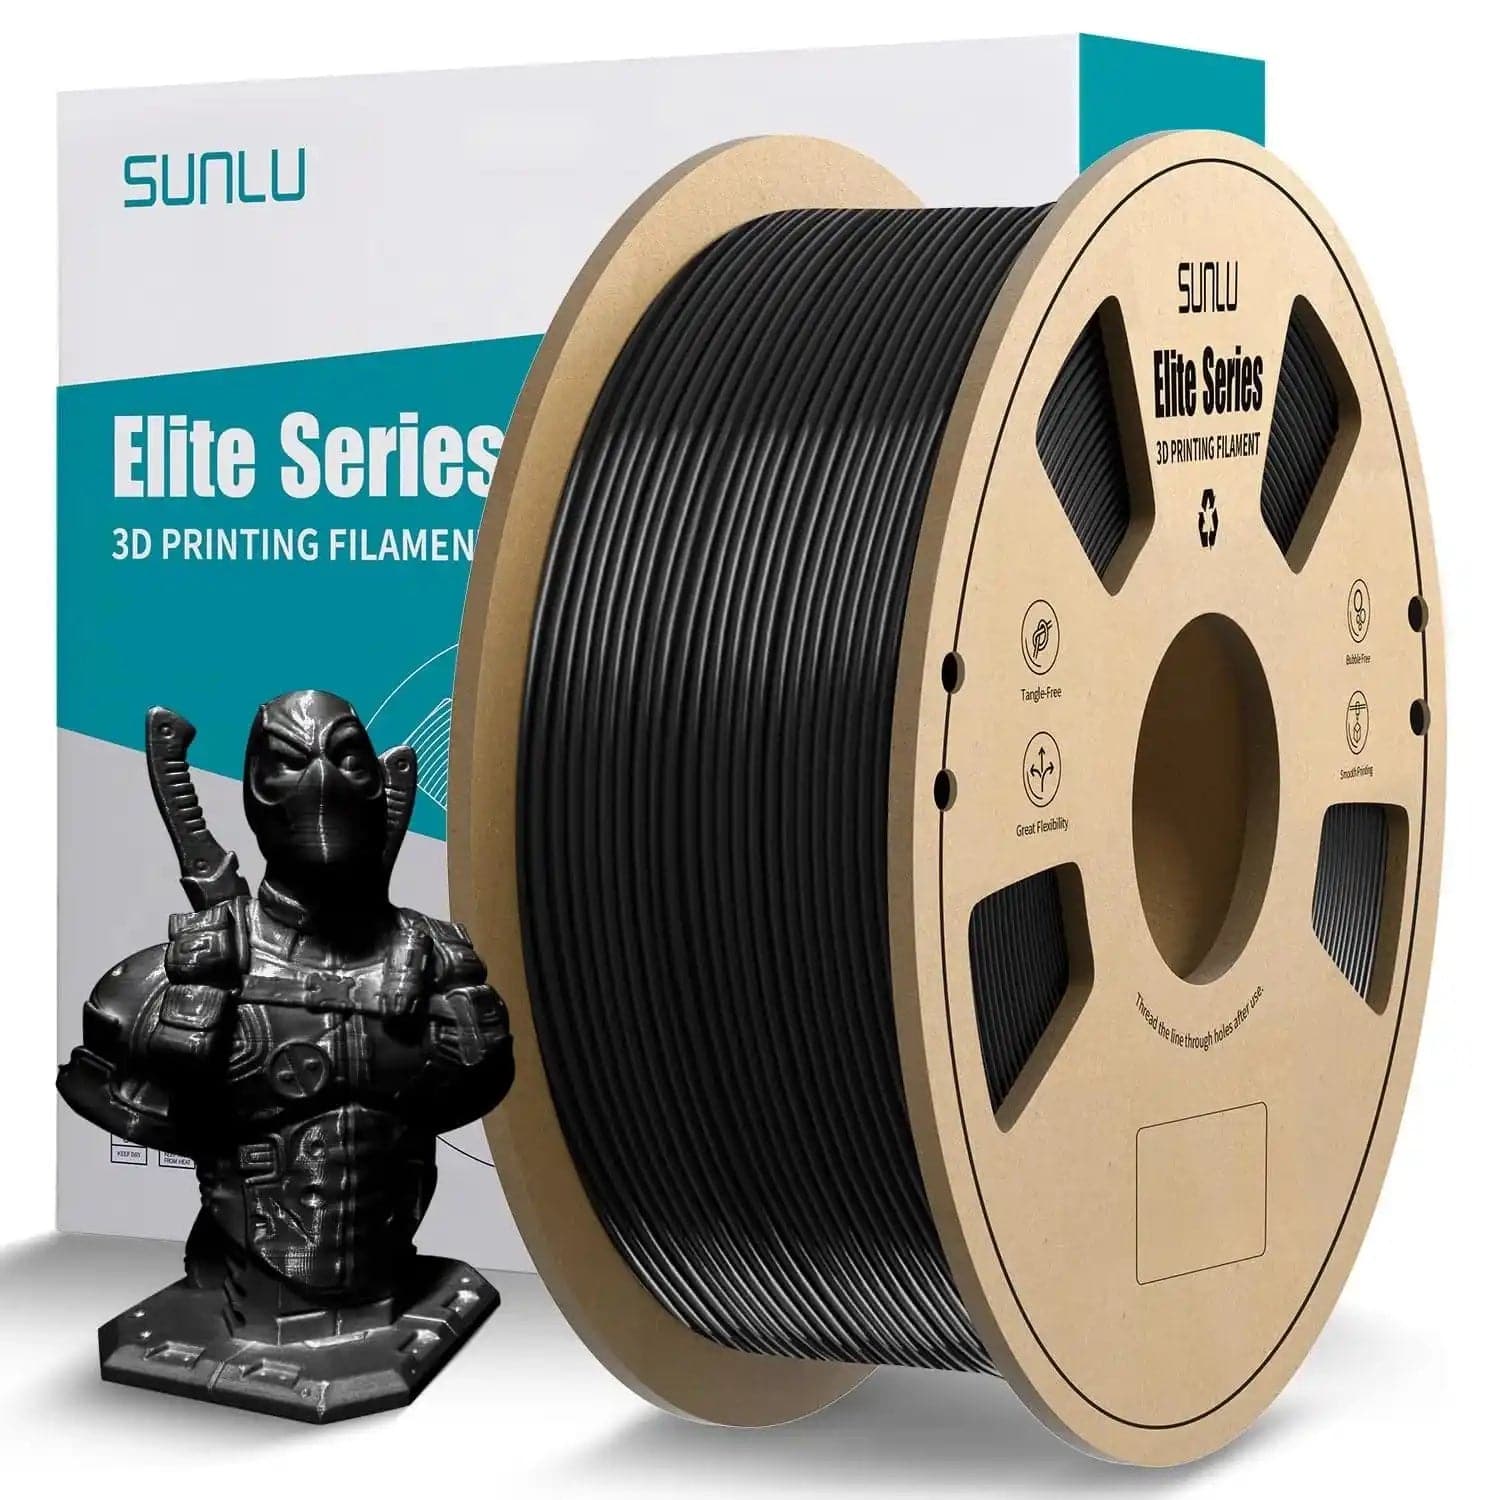 Sunlu Transparent PLA+ Filament Review » 3D Printing for Gaming and More